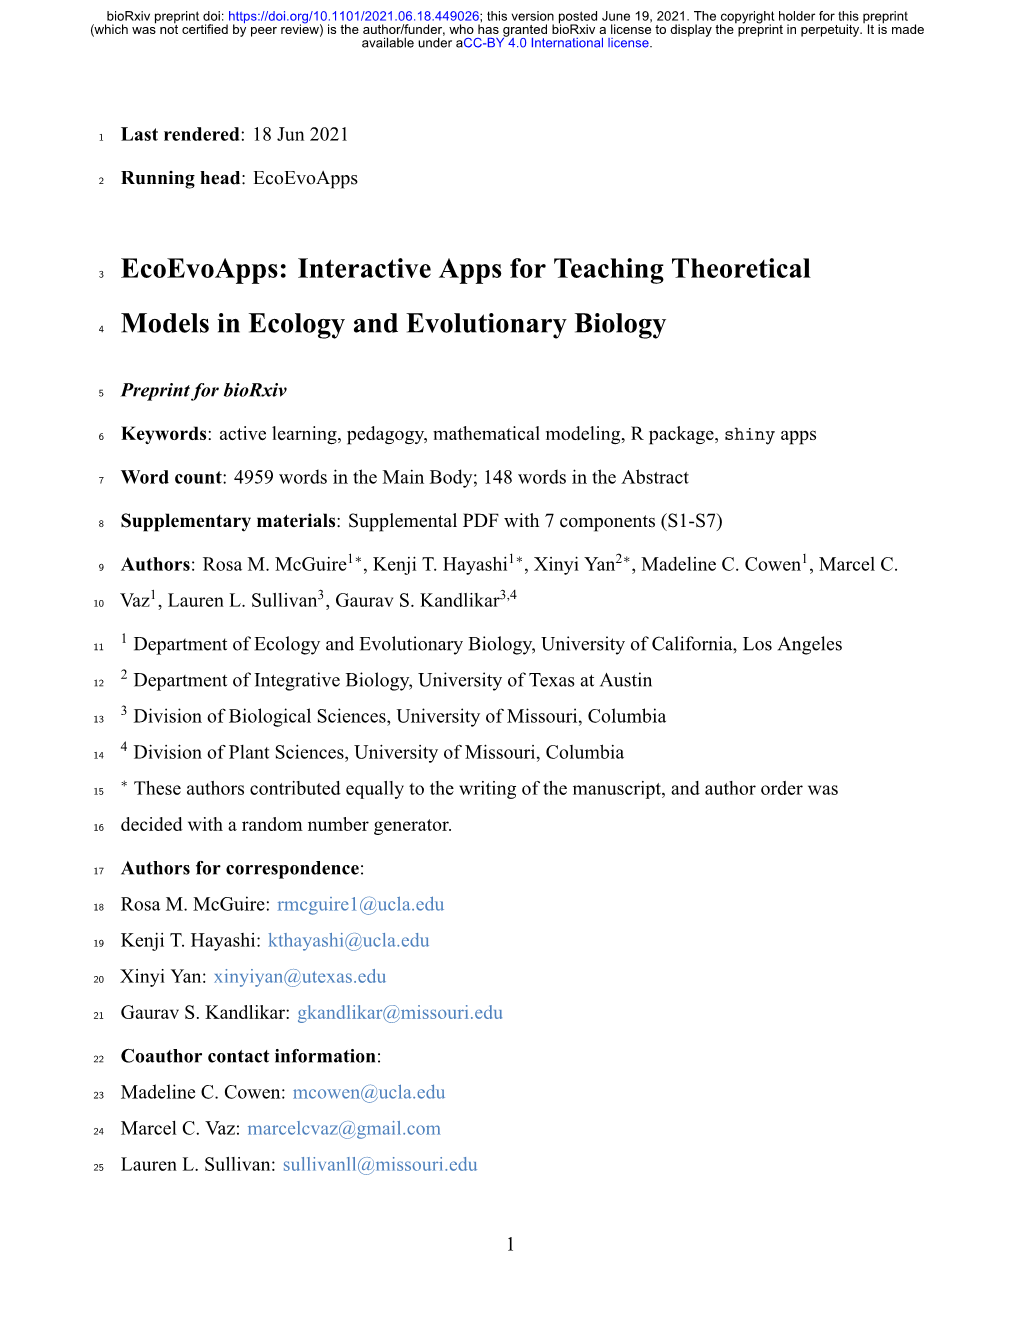 Ecoevoapps: Interactive Apps for Teaching Theoretical Models In